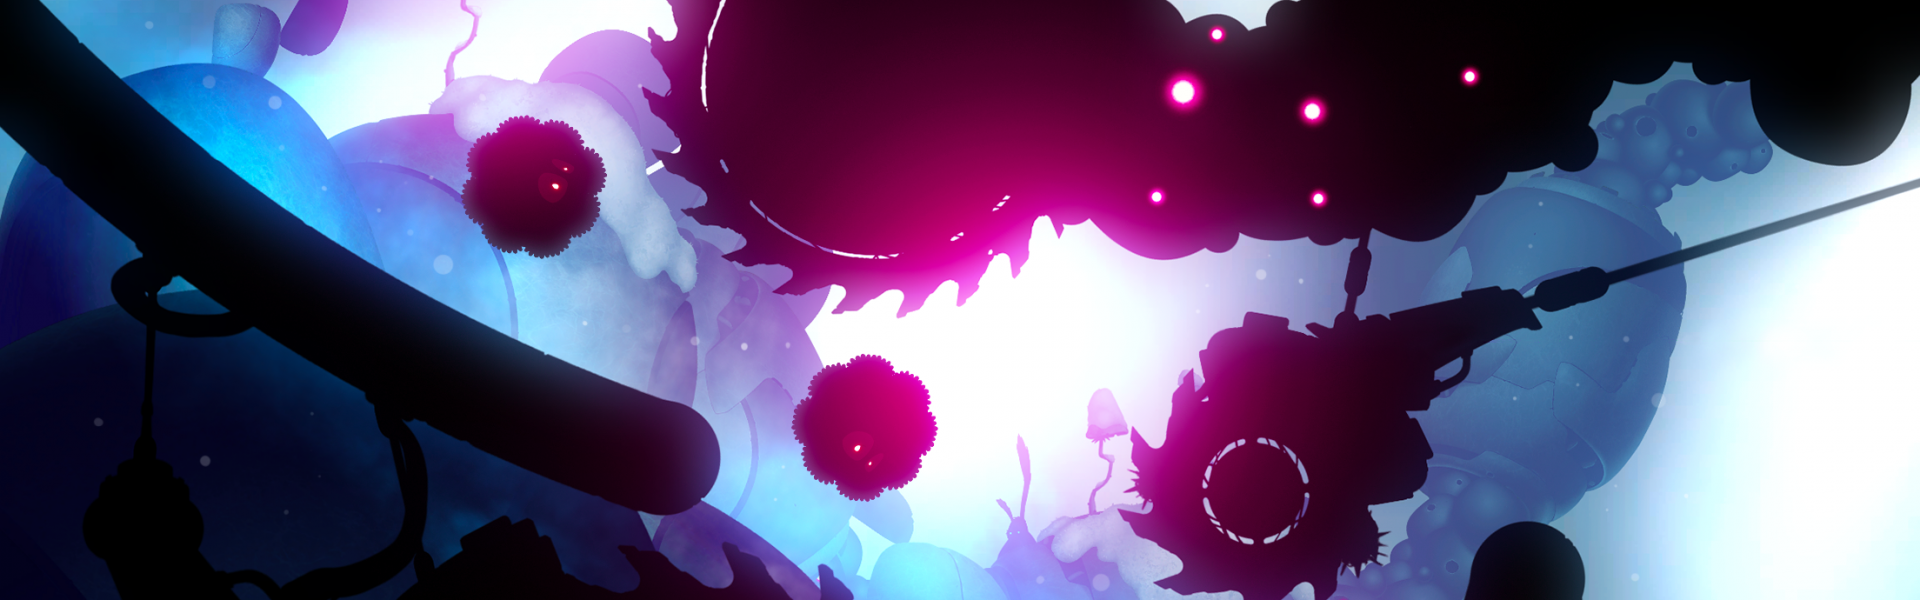 cropped-BADLAND2_2208x1242_3.png